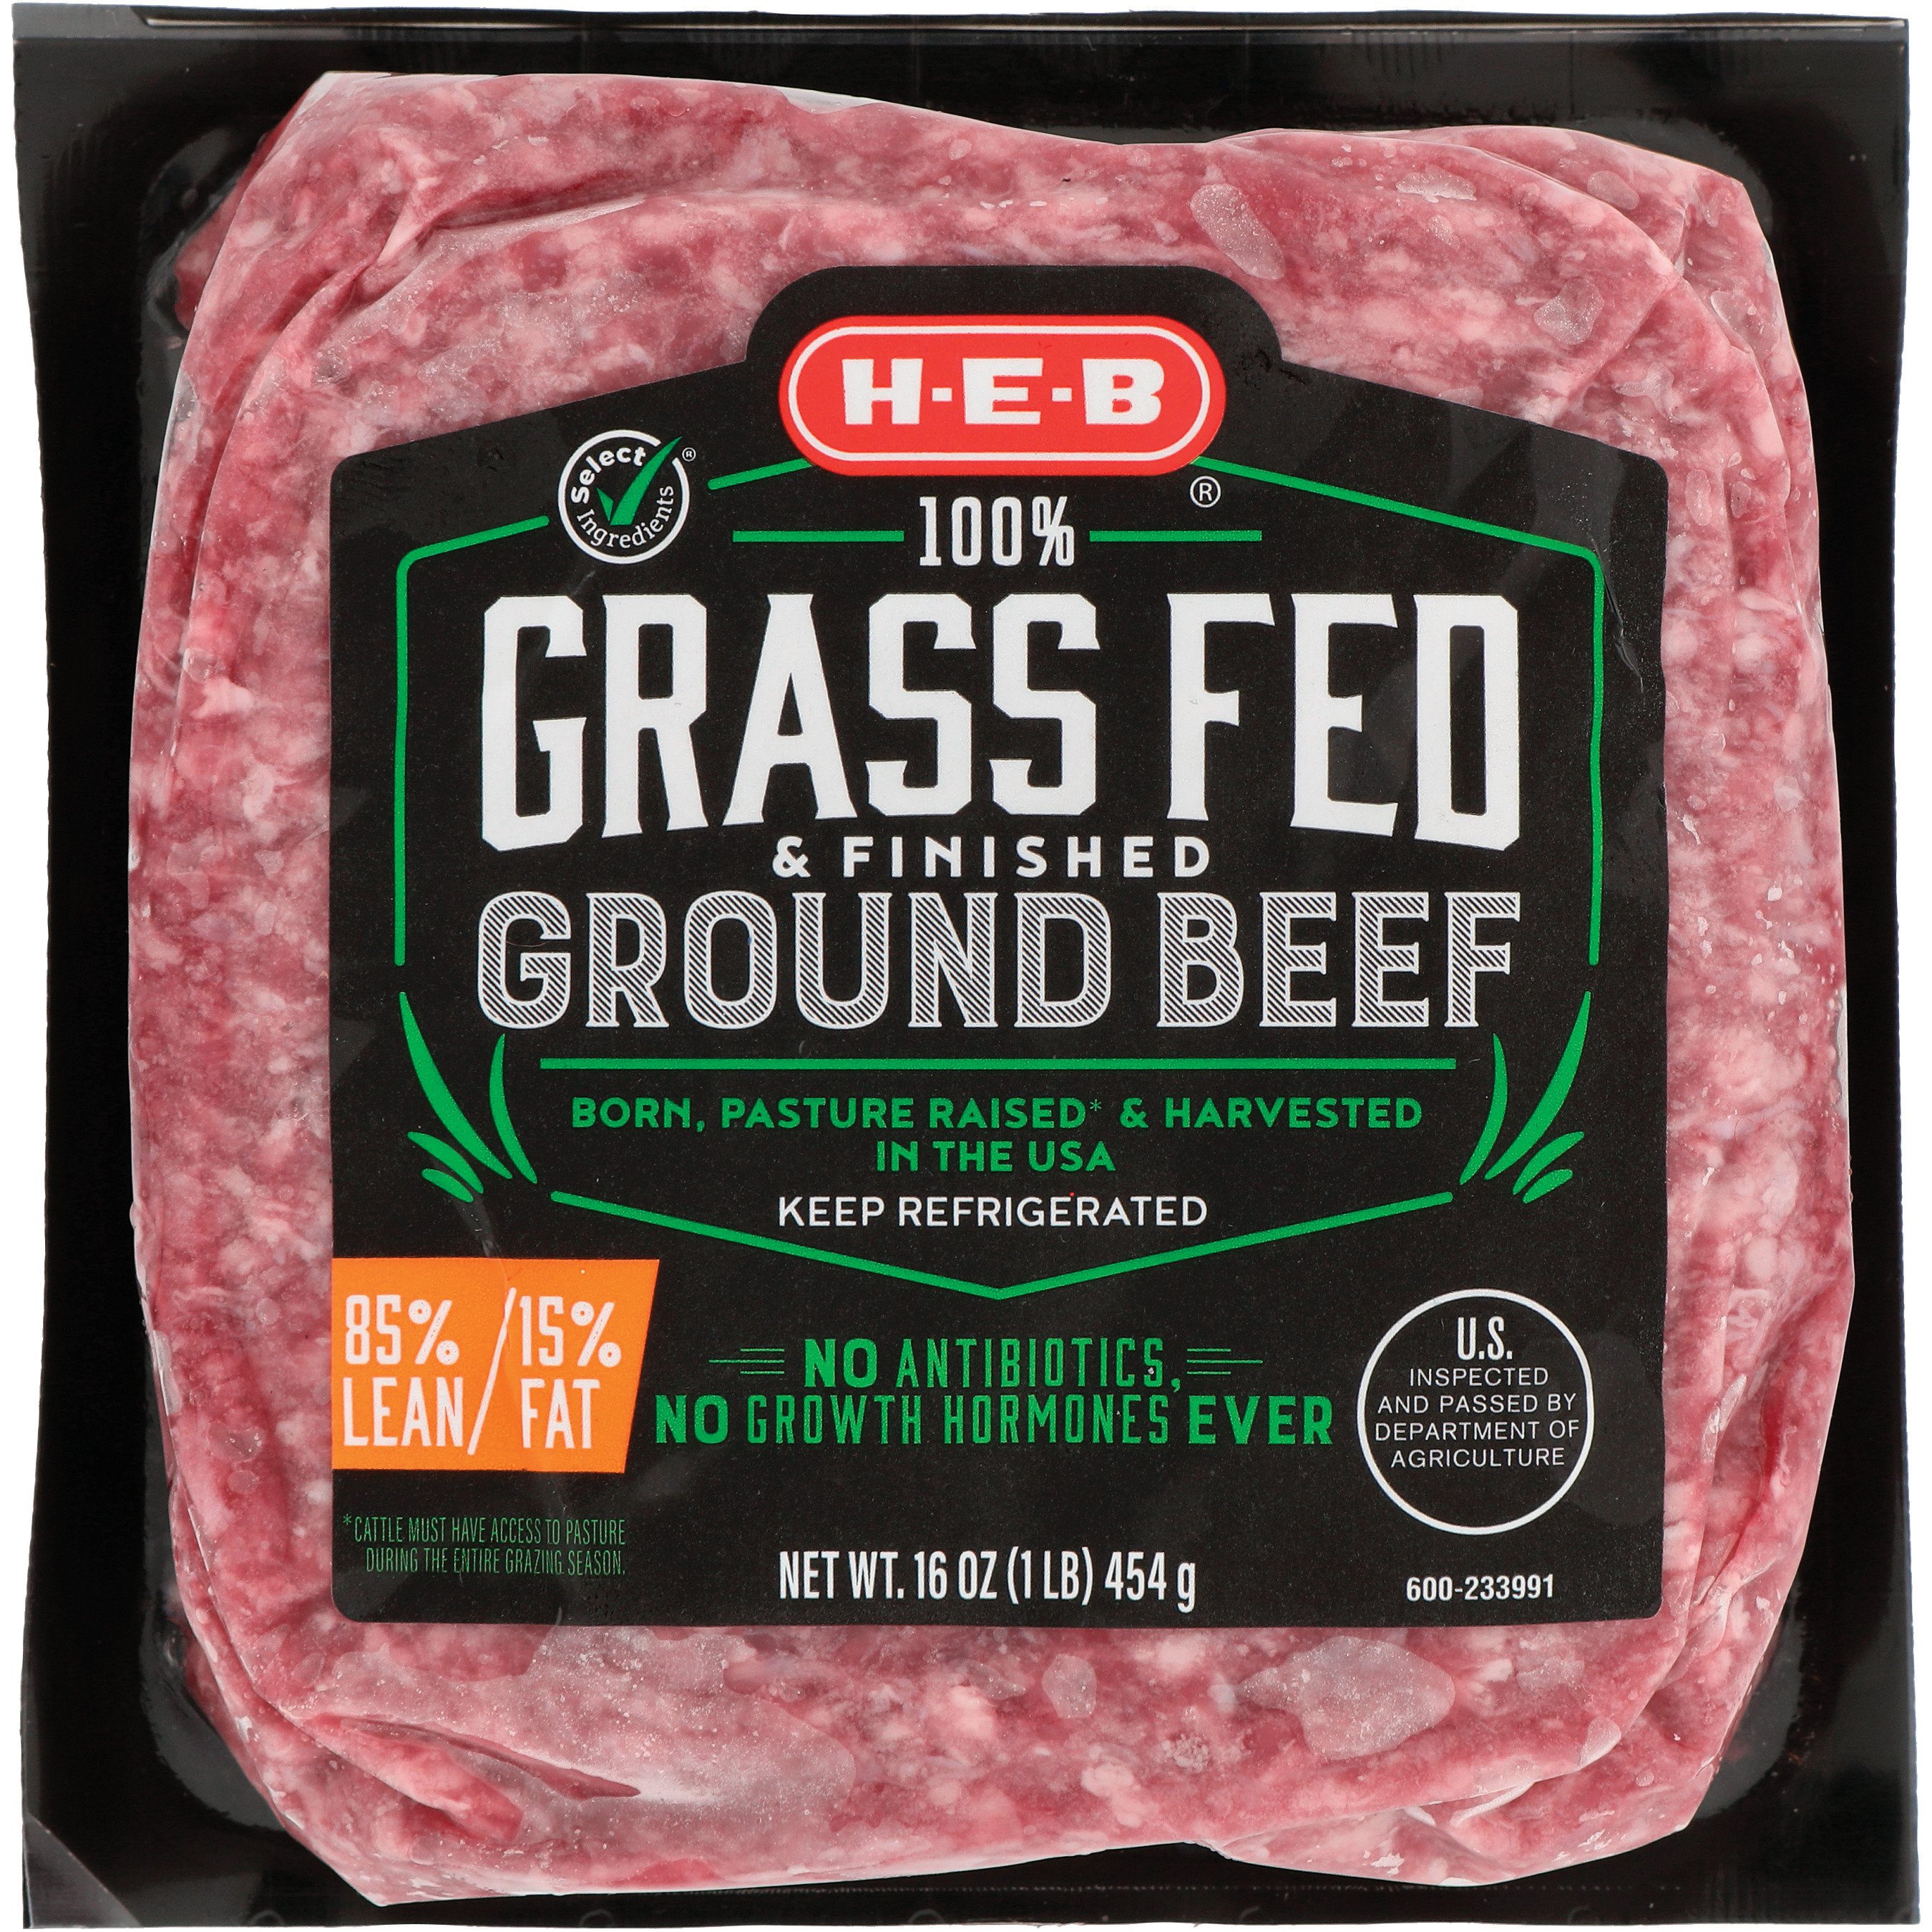 H-E-B Grass Fed & Finished Ground Beef - 9% Lean - Shop Meat at H-E-B